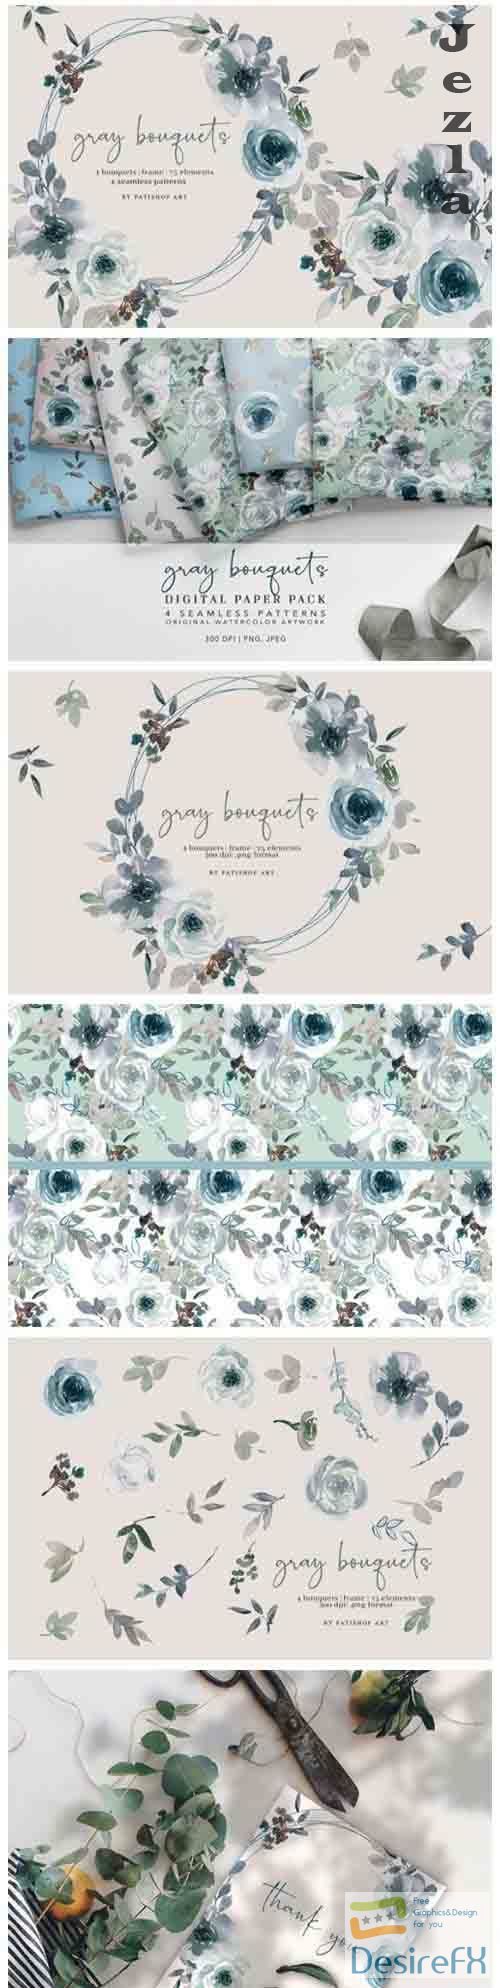 Gray and White Watercolor Floral Clipart and Pattern Set - 749038